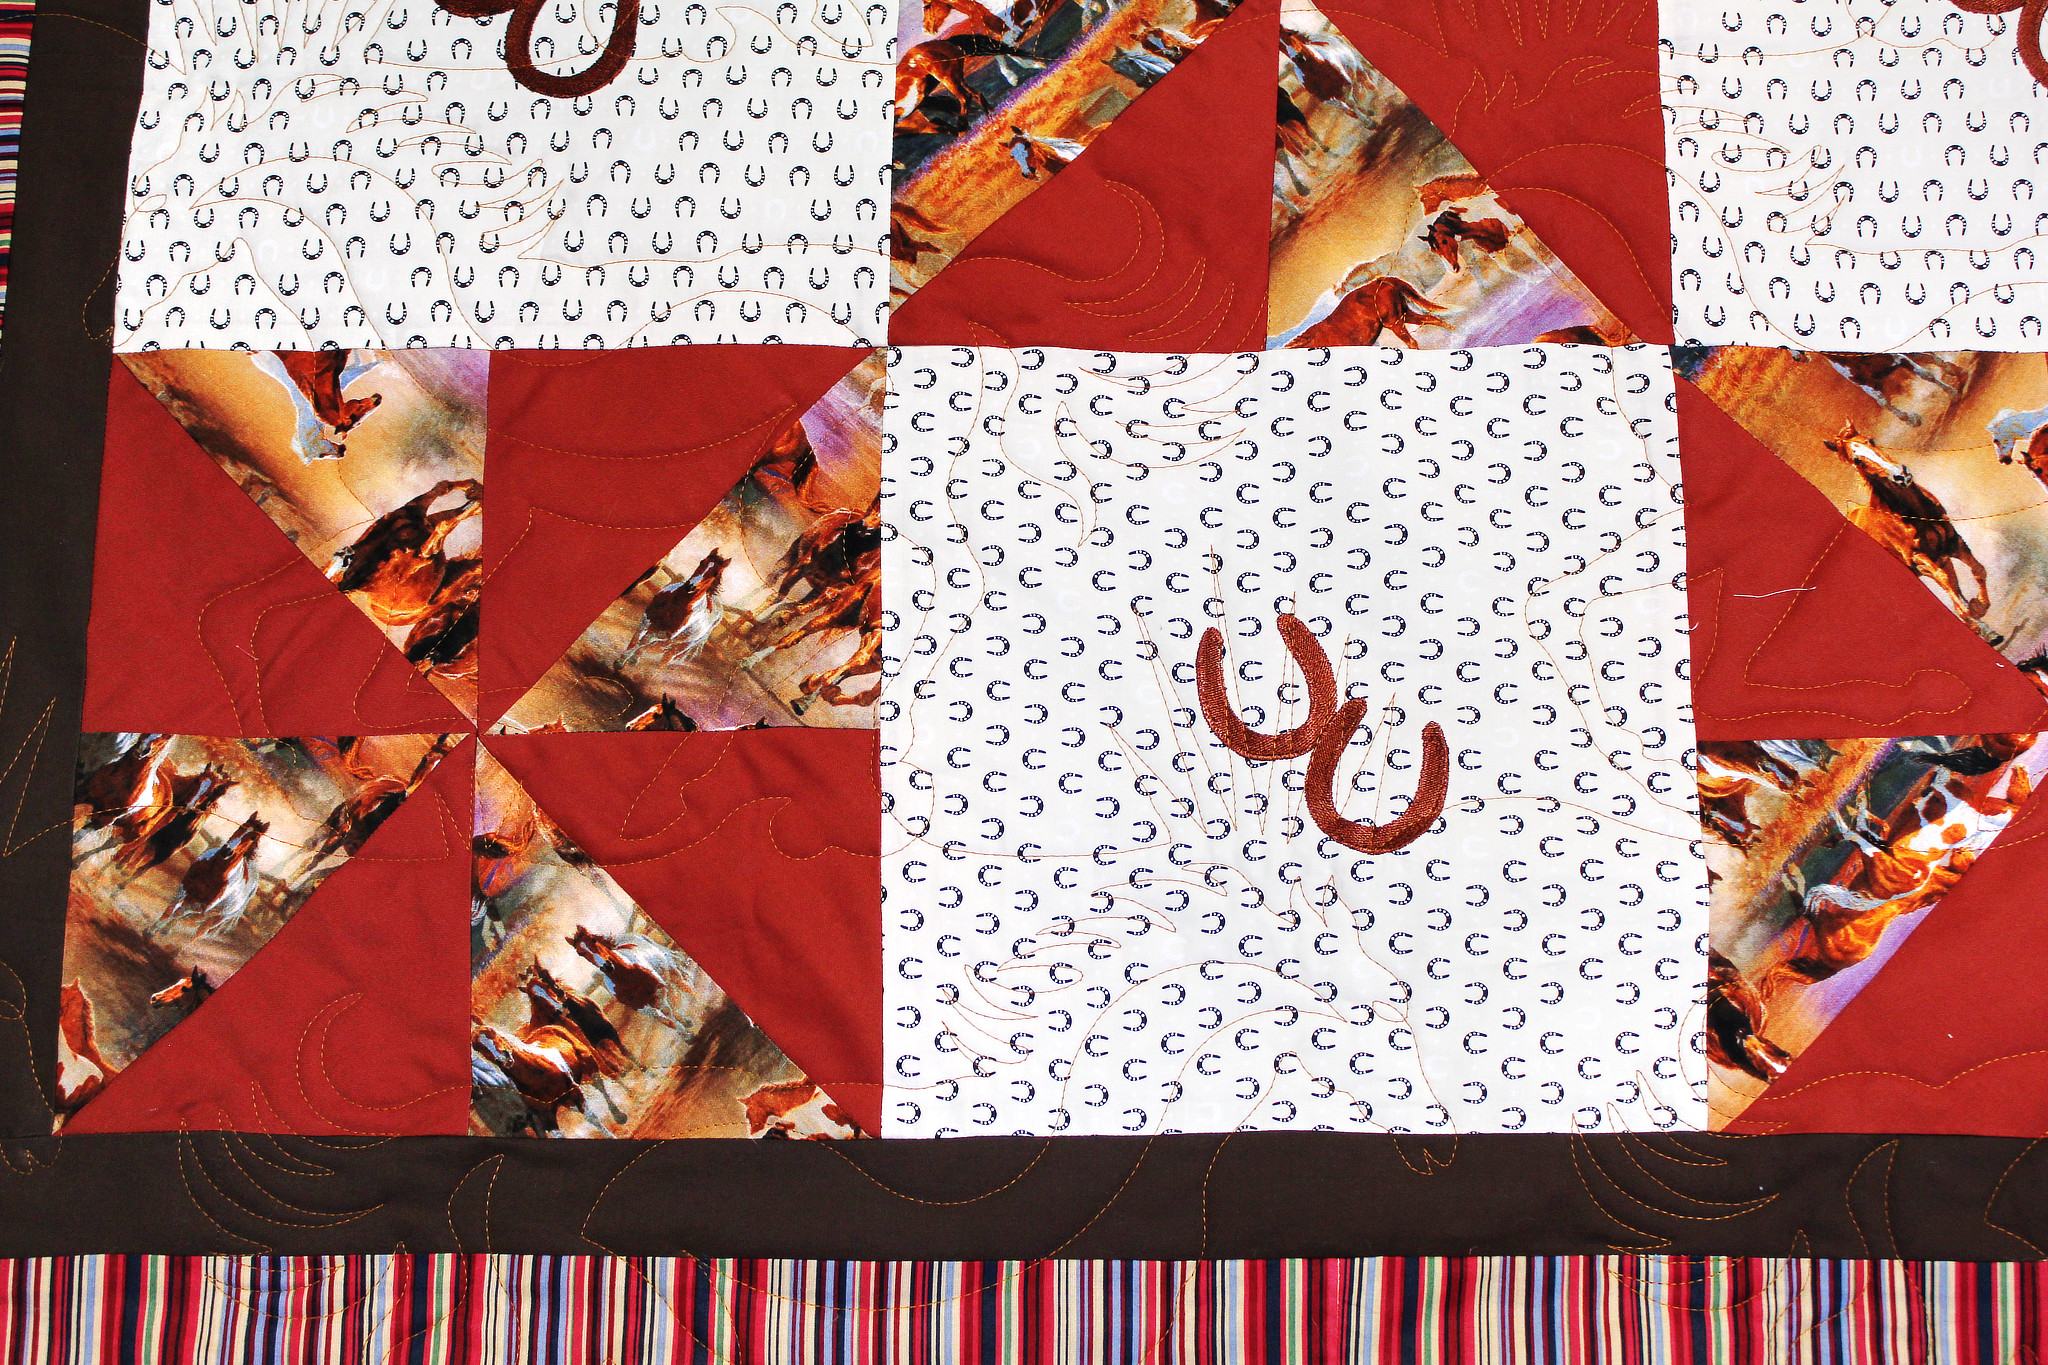 Horses and Horseshoes Quilt